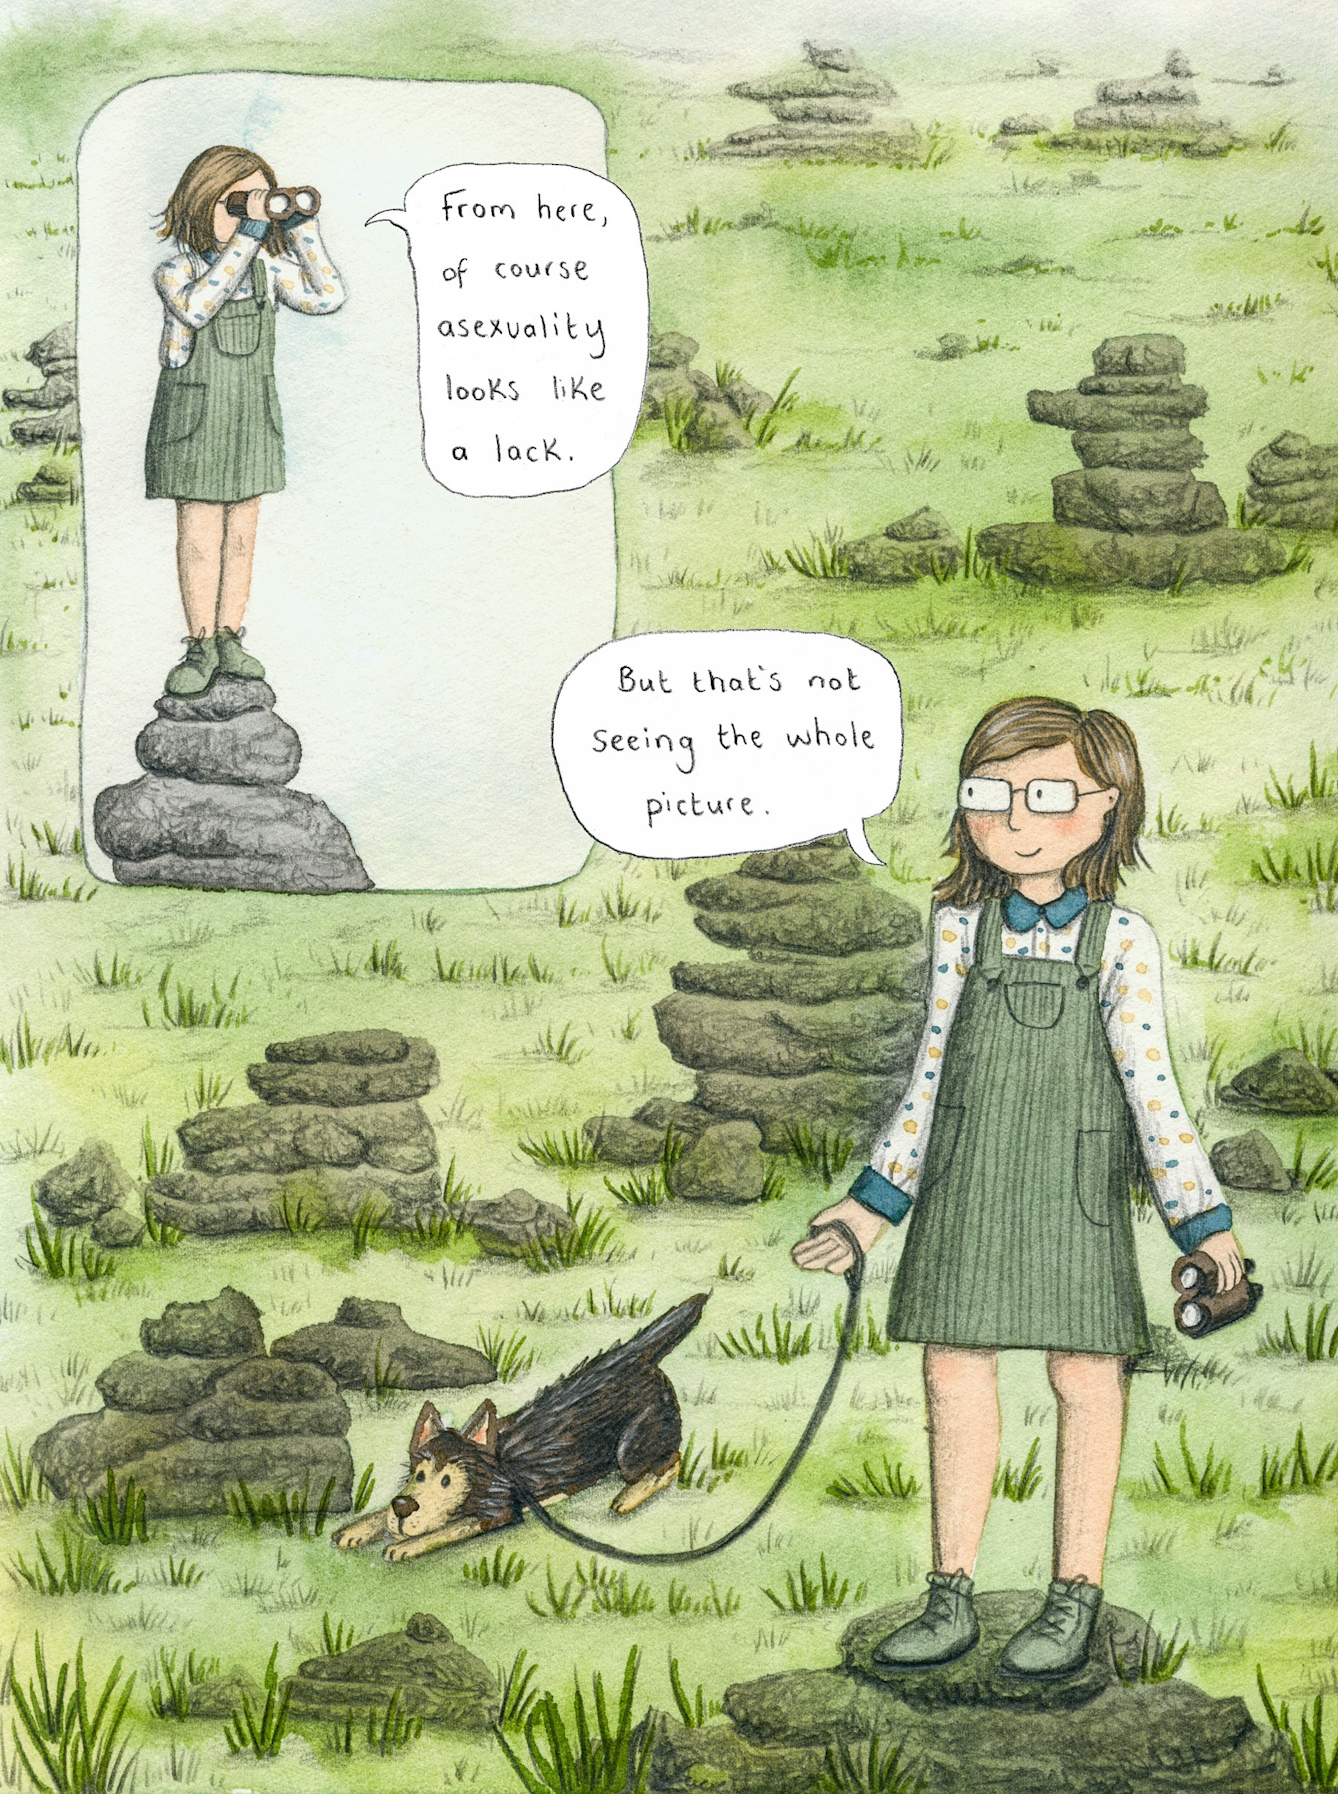 Colourful illustration featuring a white panel overlaid on the feature illustration. 

The panel shows a person with binoculars placed against their eyes. They have shoulder length brown hair and are wearing a polka dot top and green dungaree dress. They are standing on a pile of rocks, a speech bubble reads 'From here, of course asexuality looks like a lack'.

The feature illustration shows the same character standing in a field with rocks. They are holding a lead attached to the collar of a small brown dog. In their other hand is a pair of binoculars. A speech bubble reads 'But that's not seeing the whole picture.'